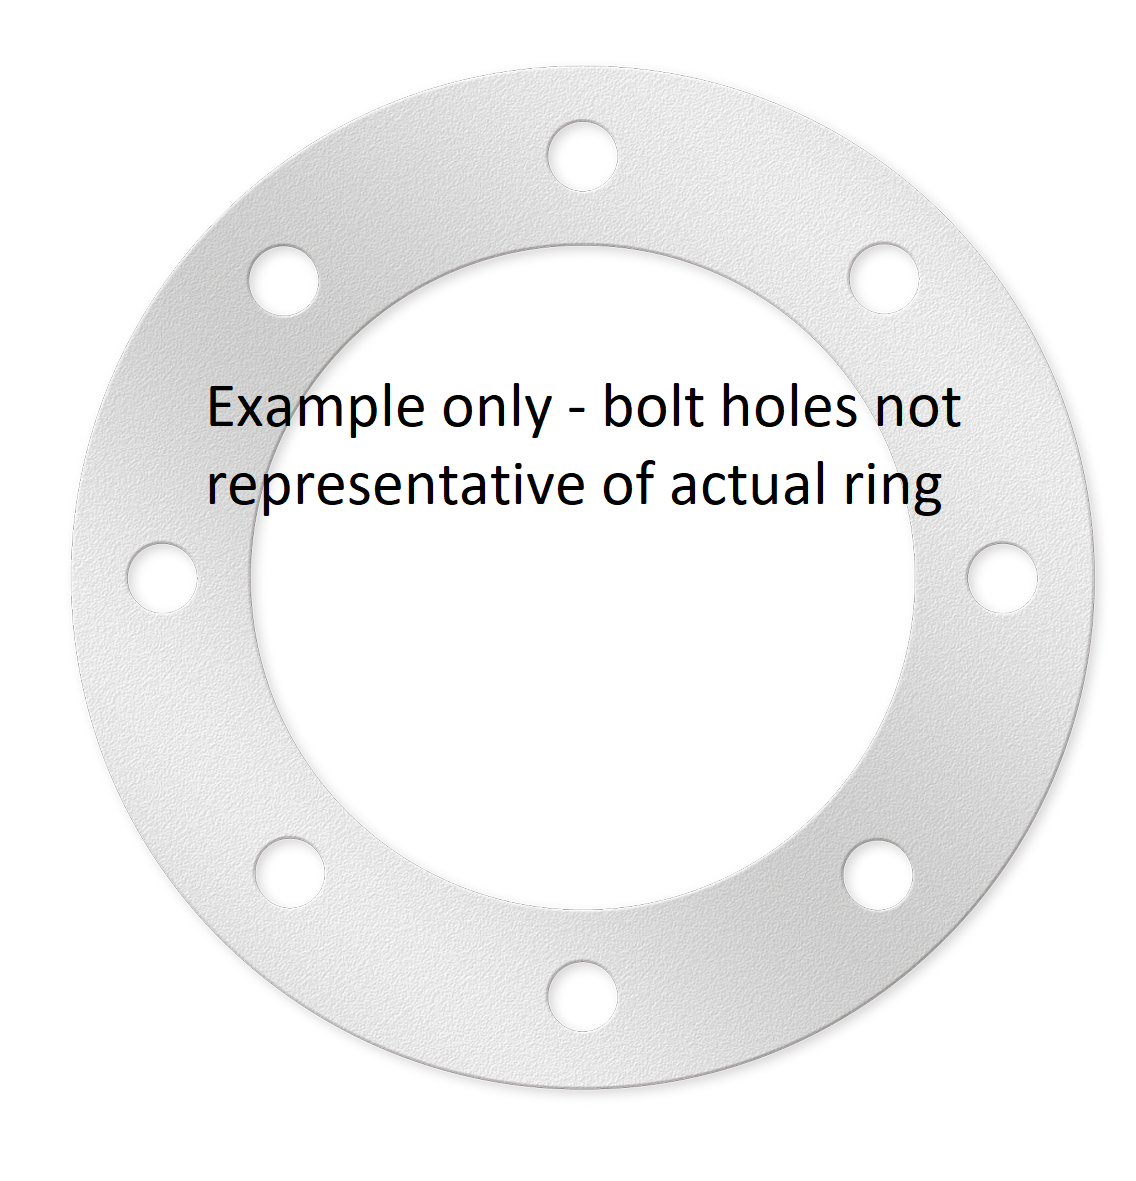 50 AS4087 B7 BACKING RING STAINLESS STEEL TO SUIT PE